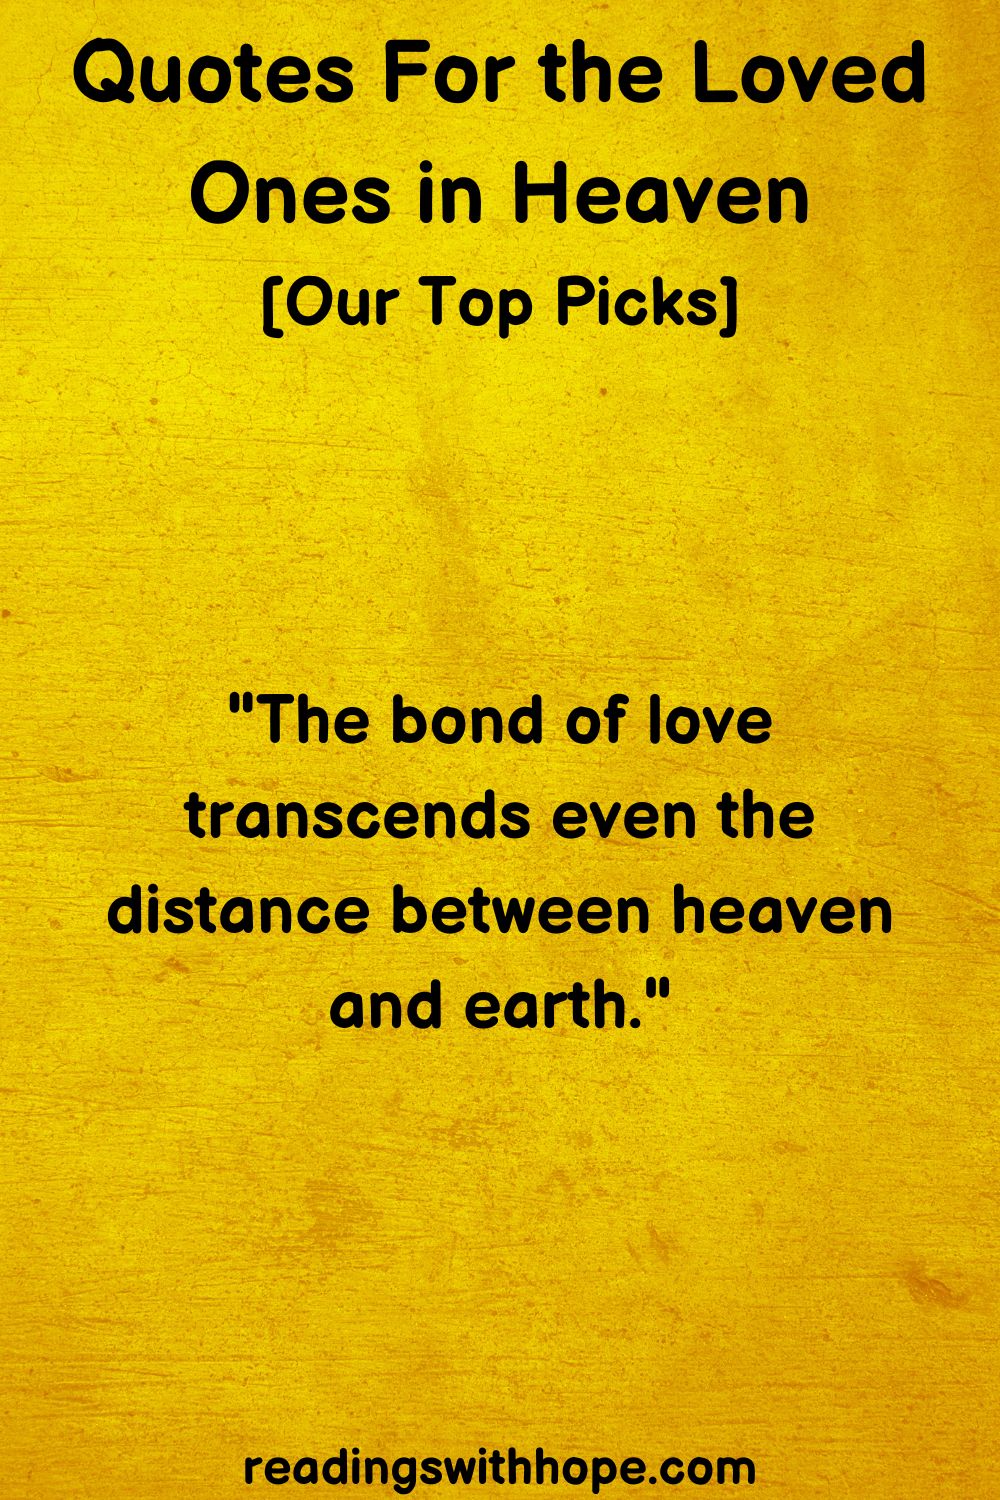 10 Quotes For the Loved Ones in Heaven